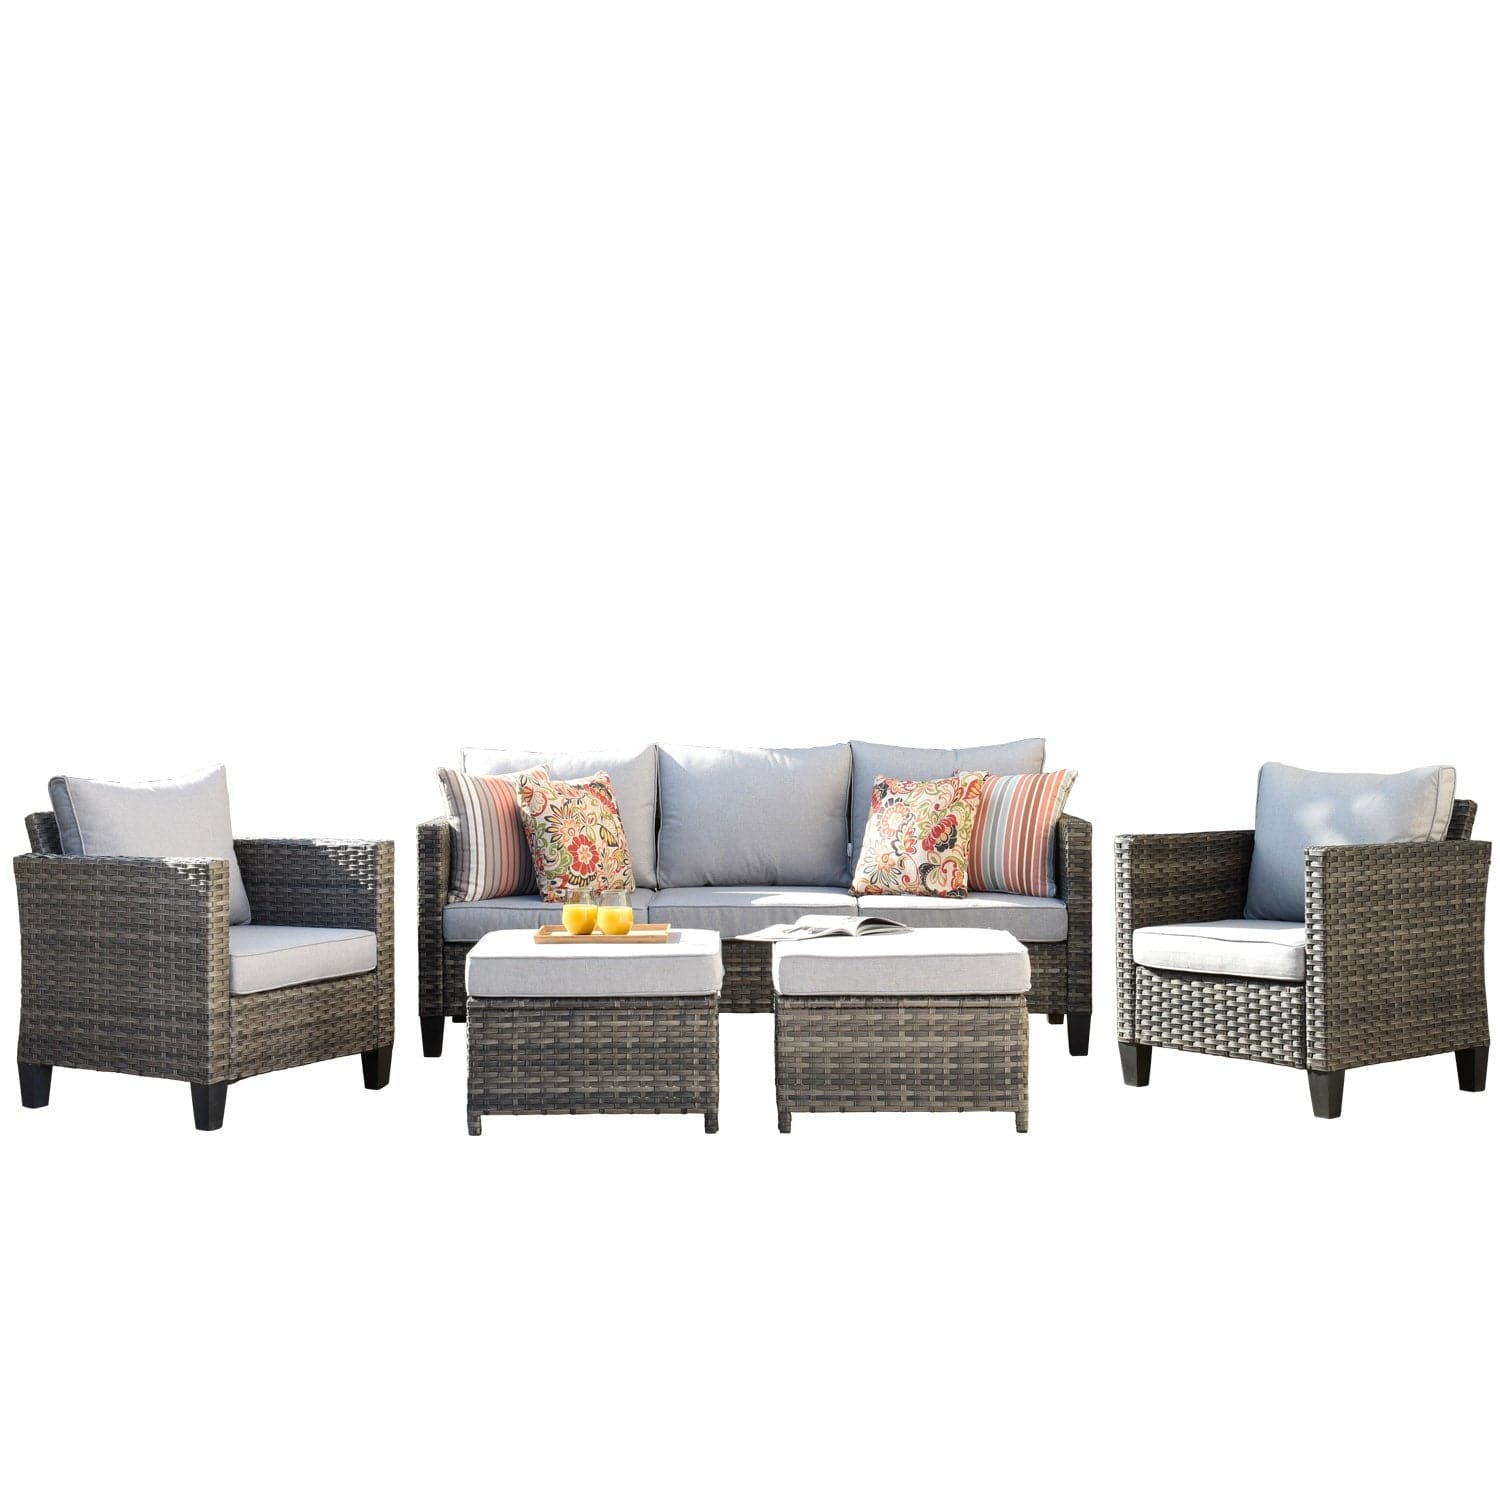 Ovios Outdoor Patio Conversation Set New Vultros 5-Piece High Back Sofa Set with Cushions